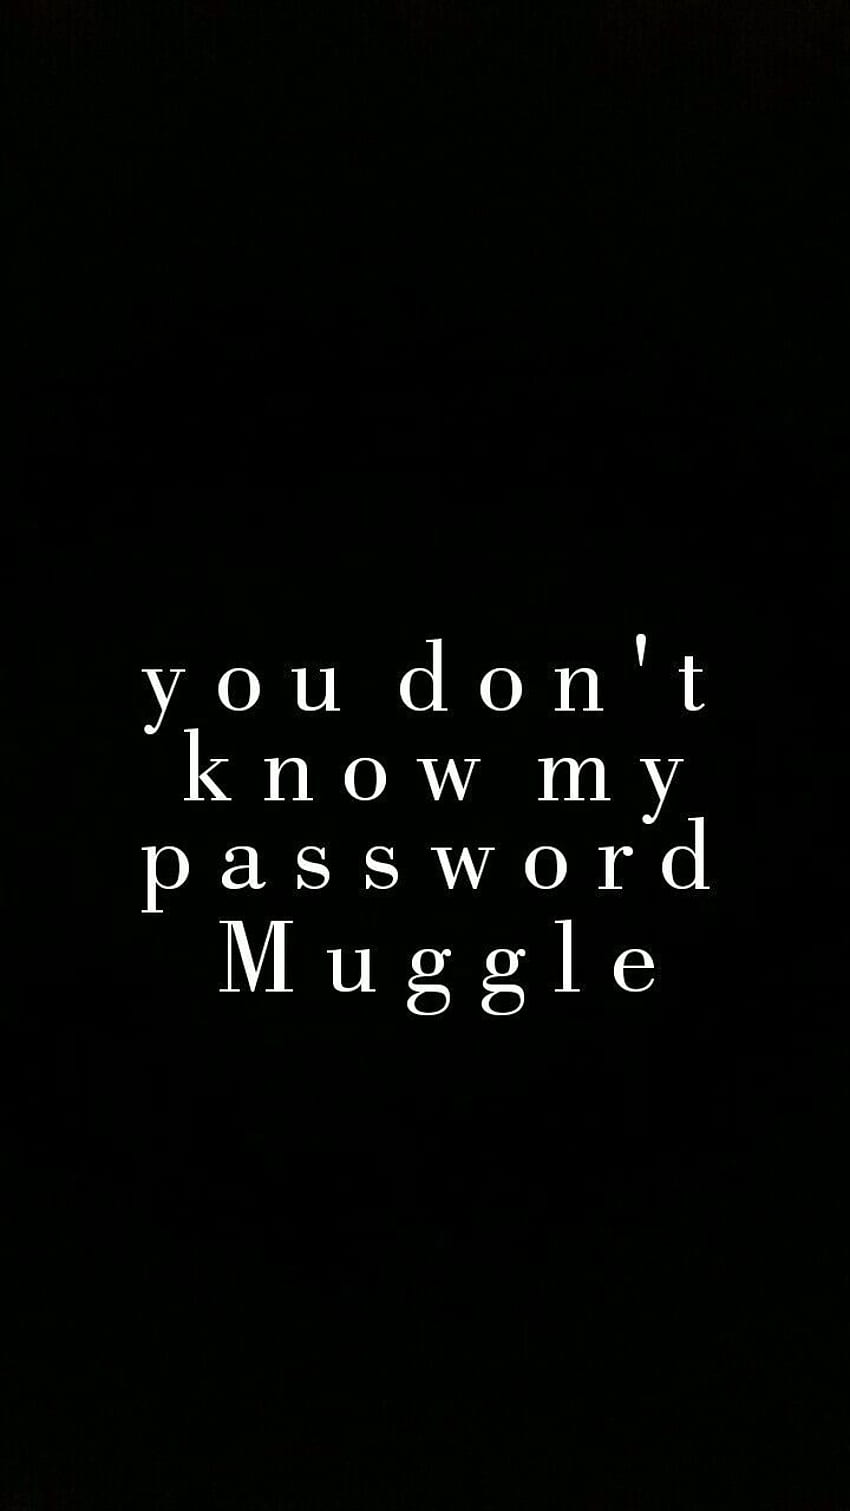 You don't know my Password Muggle lock screen Harry, Harry Potter Muggle HD phone wallpaper